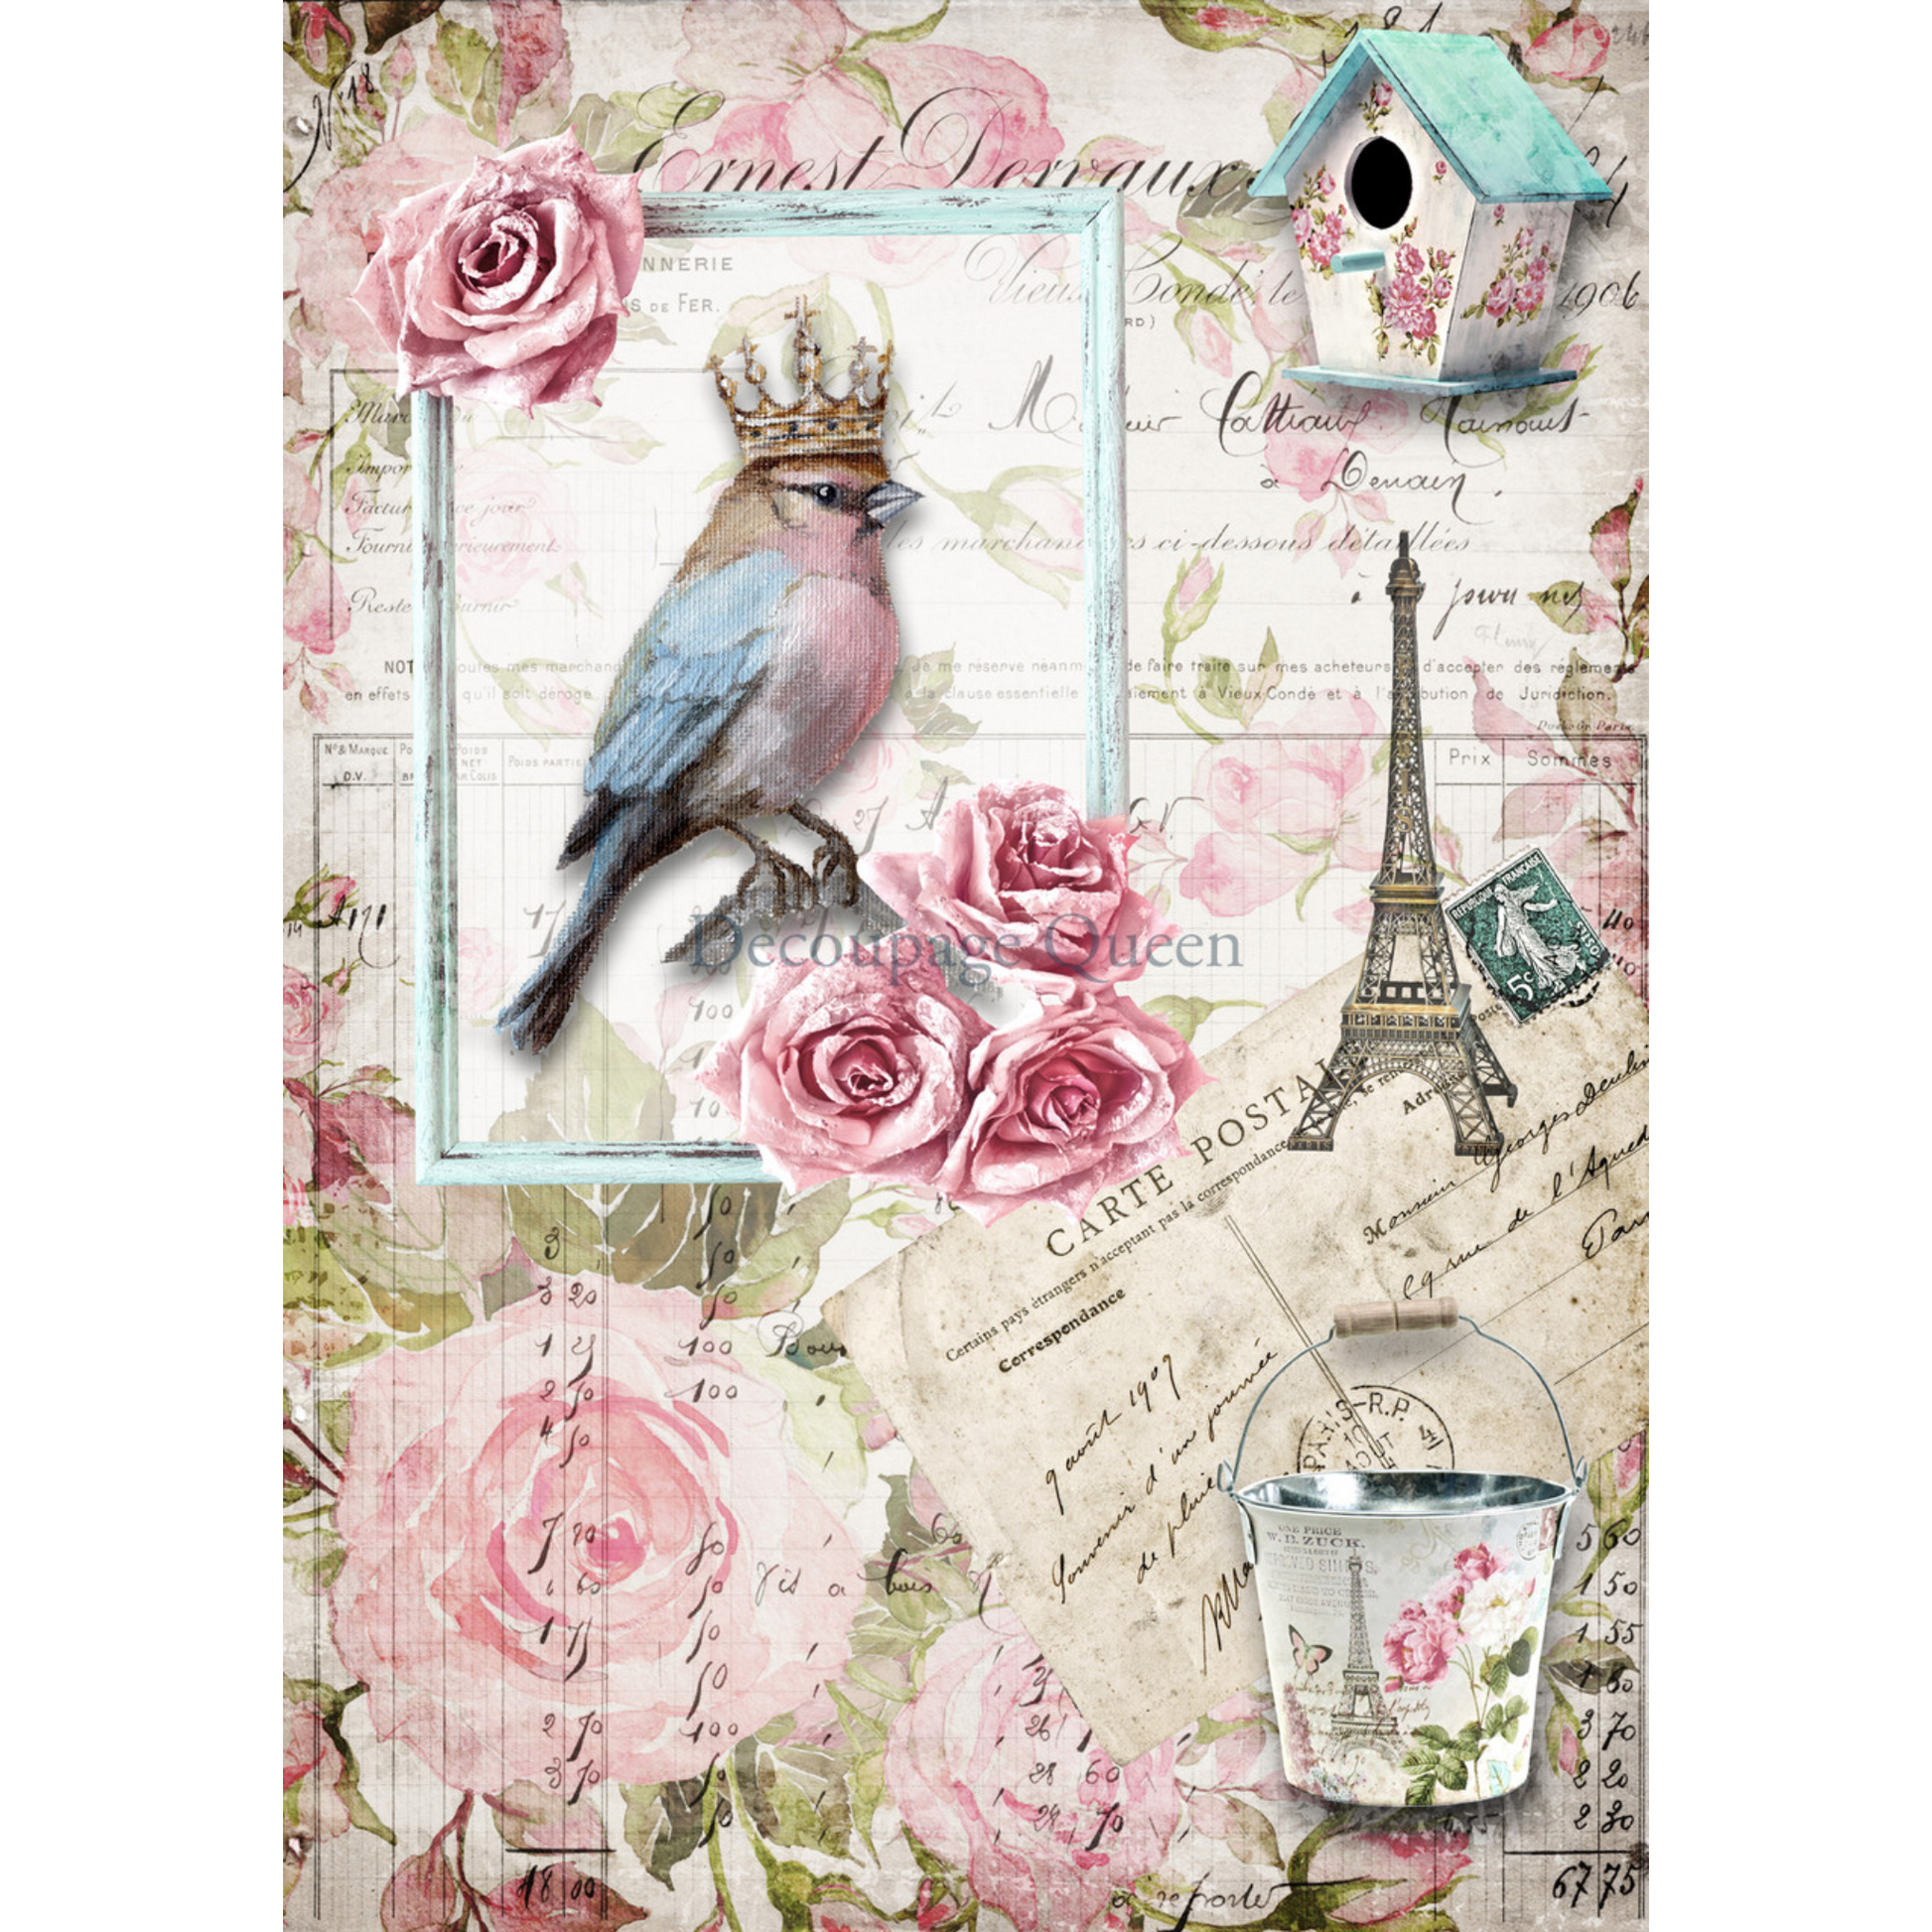 "Forever Yours" decoupage rice paper by Decoupage Queen. Available at Milton's Daughter.